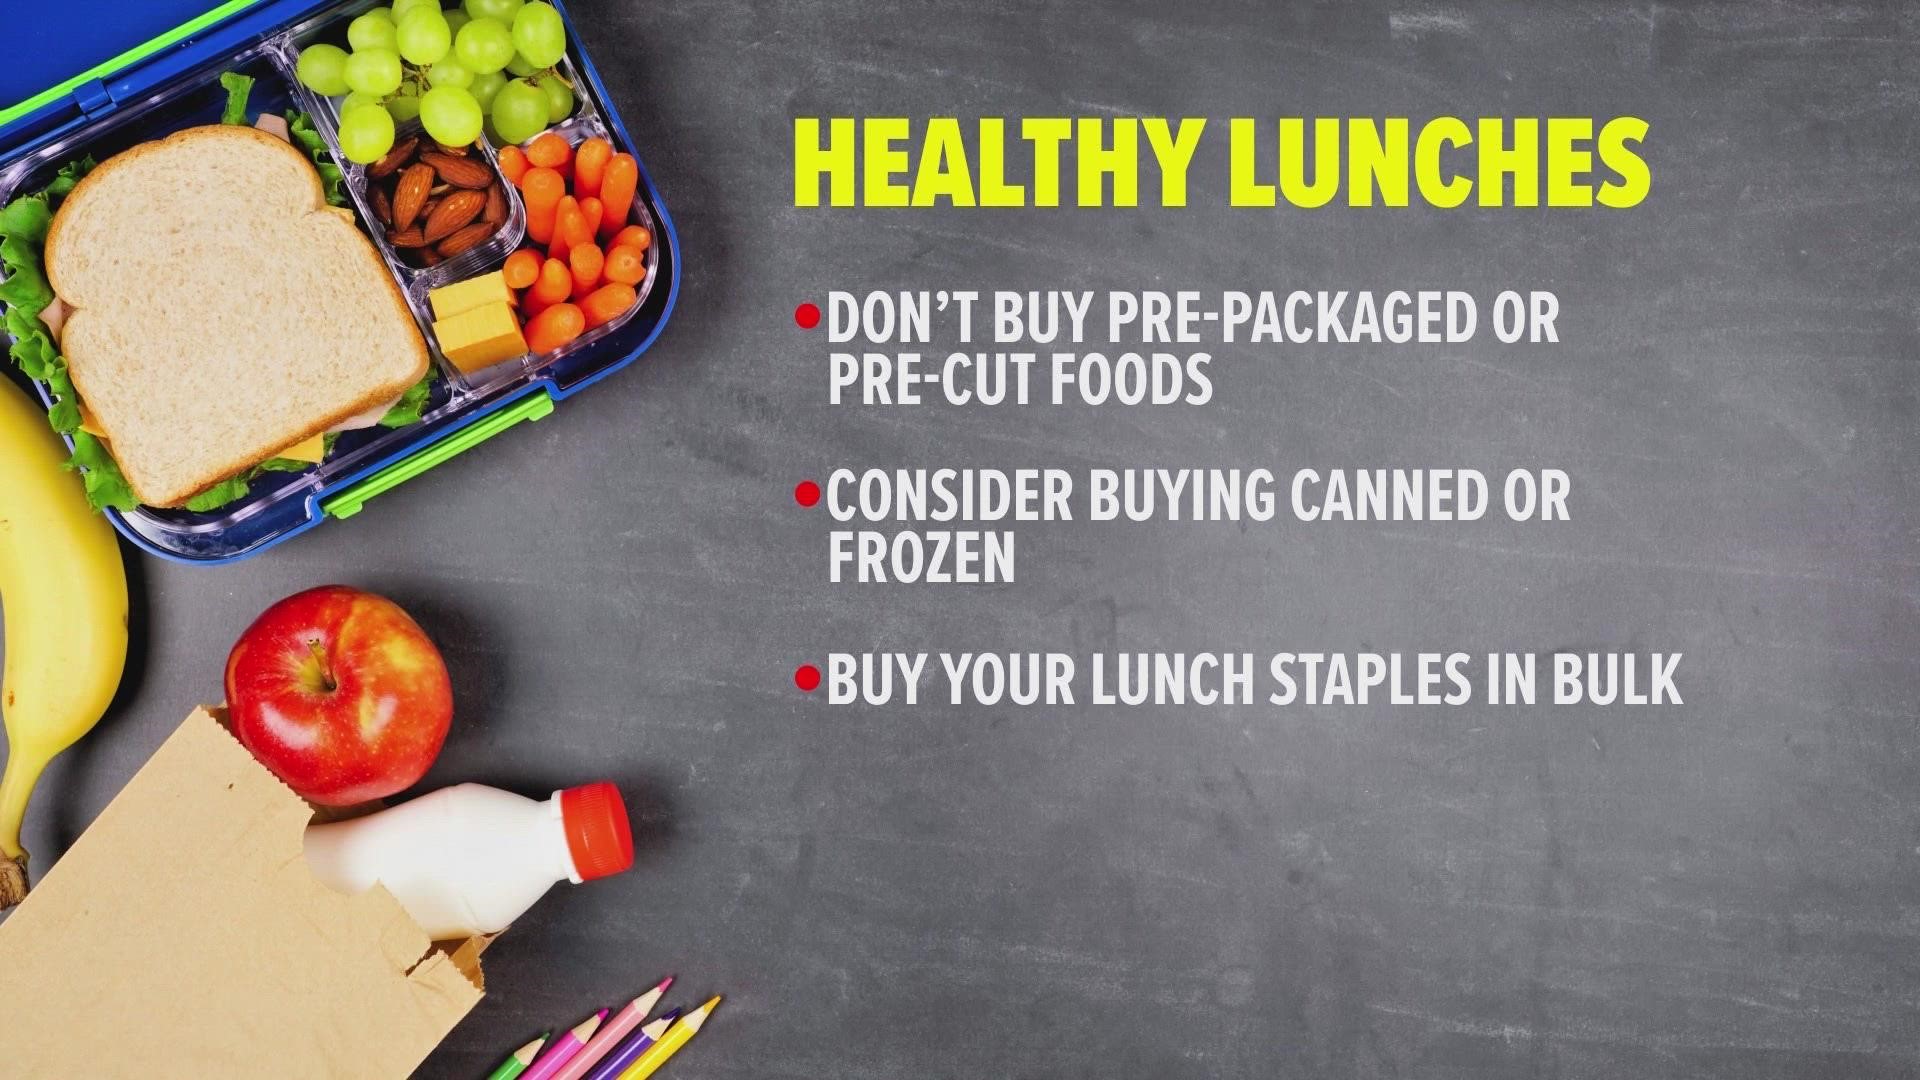 Here's how to make their lunches healthy and keep under budget.